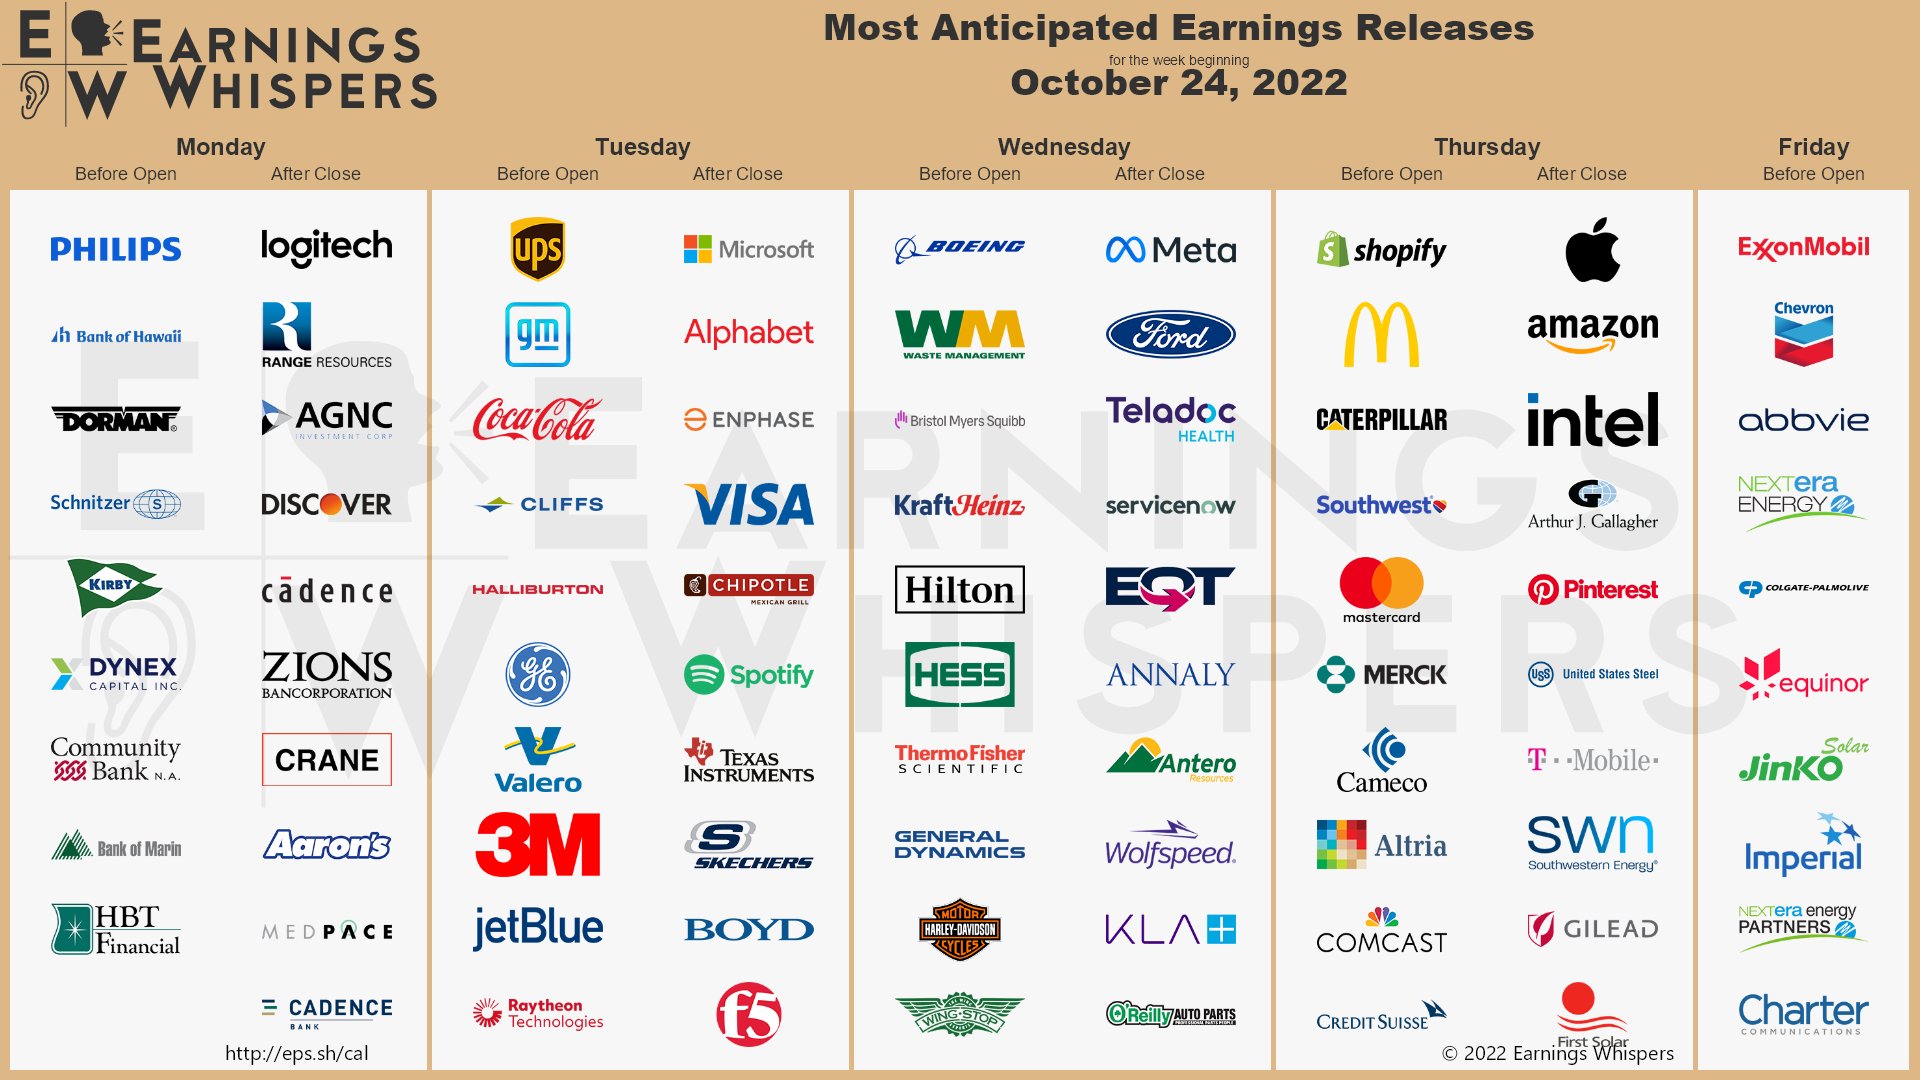 The most anticipated earnings releases scheduled for the week are Apple #AAPL, Amazon #AMZN, Microsoft #MSFT, Meta Platforms #META, Alphabet #GOOGL, UPS #UPS, Shopify #SHOP, General Motors #GM, Coca-Cola #KO, and Boeing #BA.  